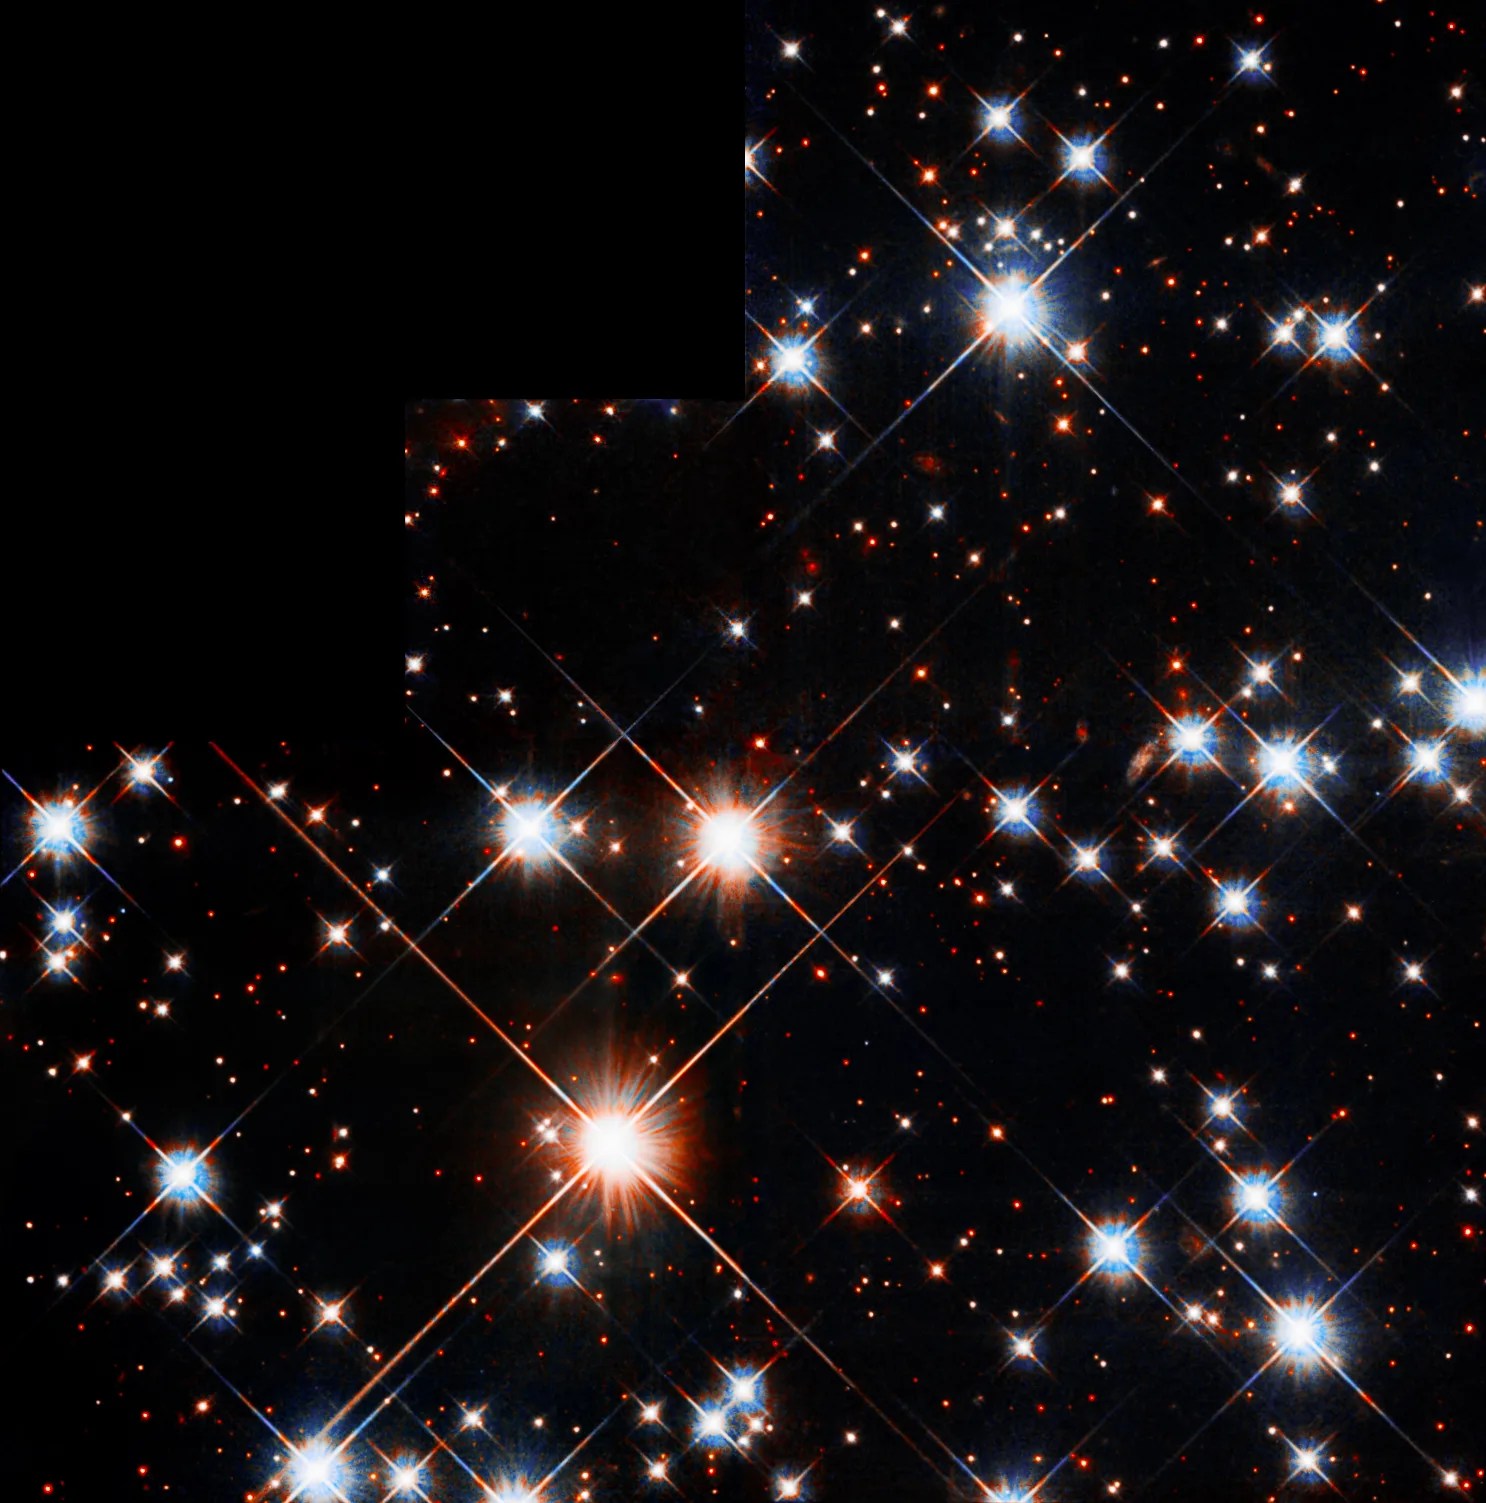 Several very bright stars are scattered throughout the field of view, with many fainter ones behind them. Of the four brightest stars, two have a reddish-orange hue, one is reddish-white, and one is bluish-white.